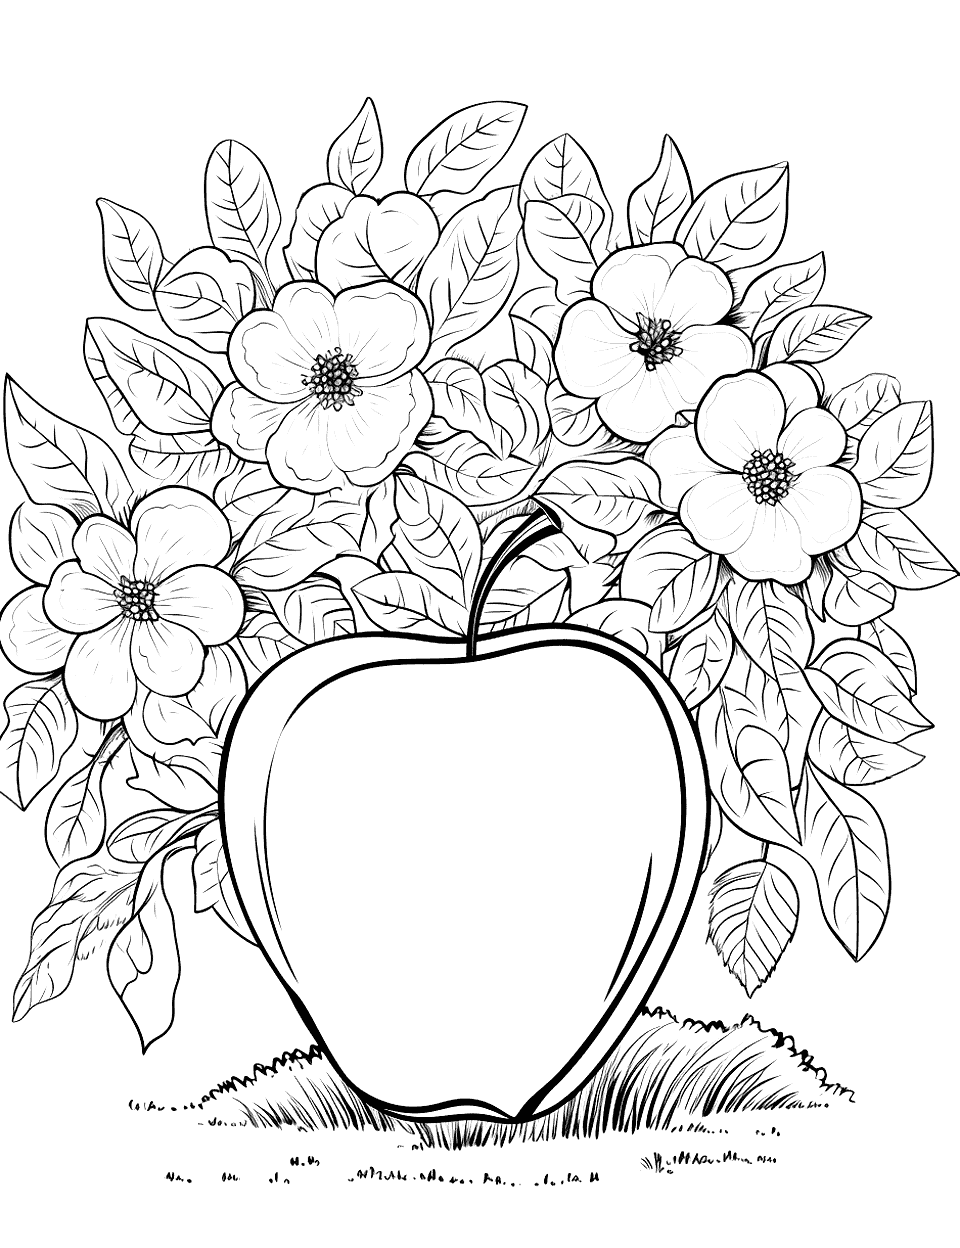 Apple in a Garden Coloring Page - An apple lying amidst flowers in a beautiful garden.